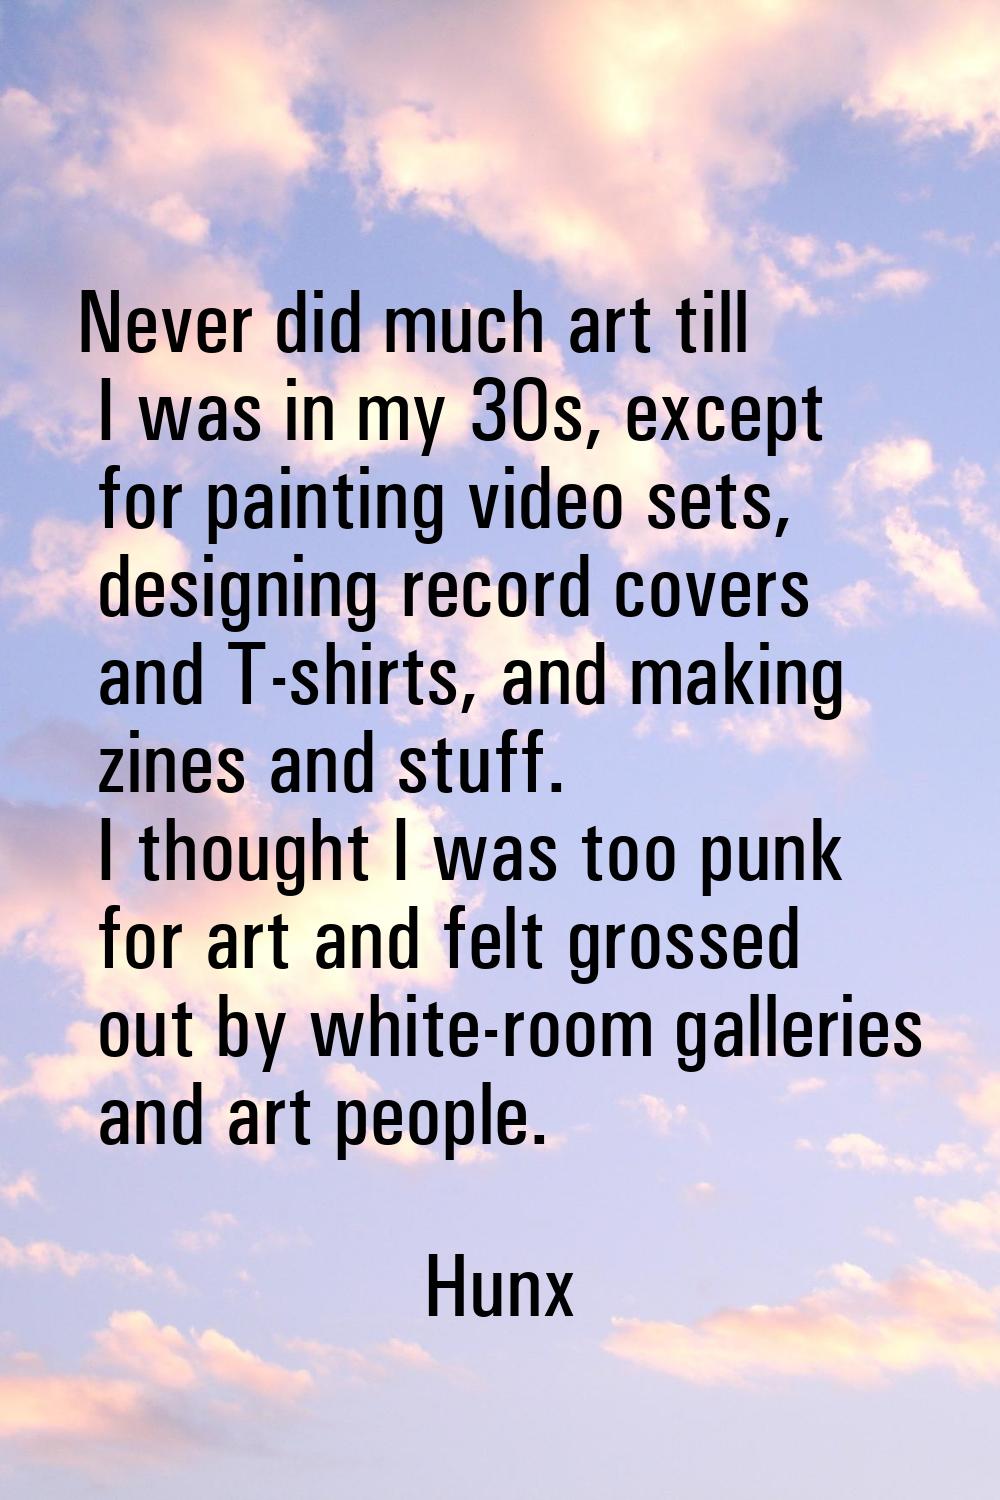 Never did much art till I was in my 30s, except for painting video sets, designing record covers an